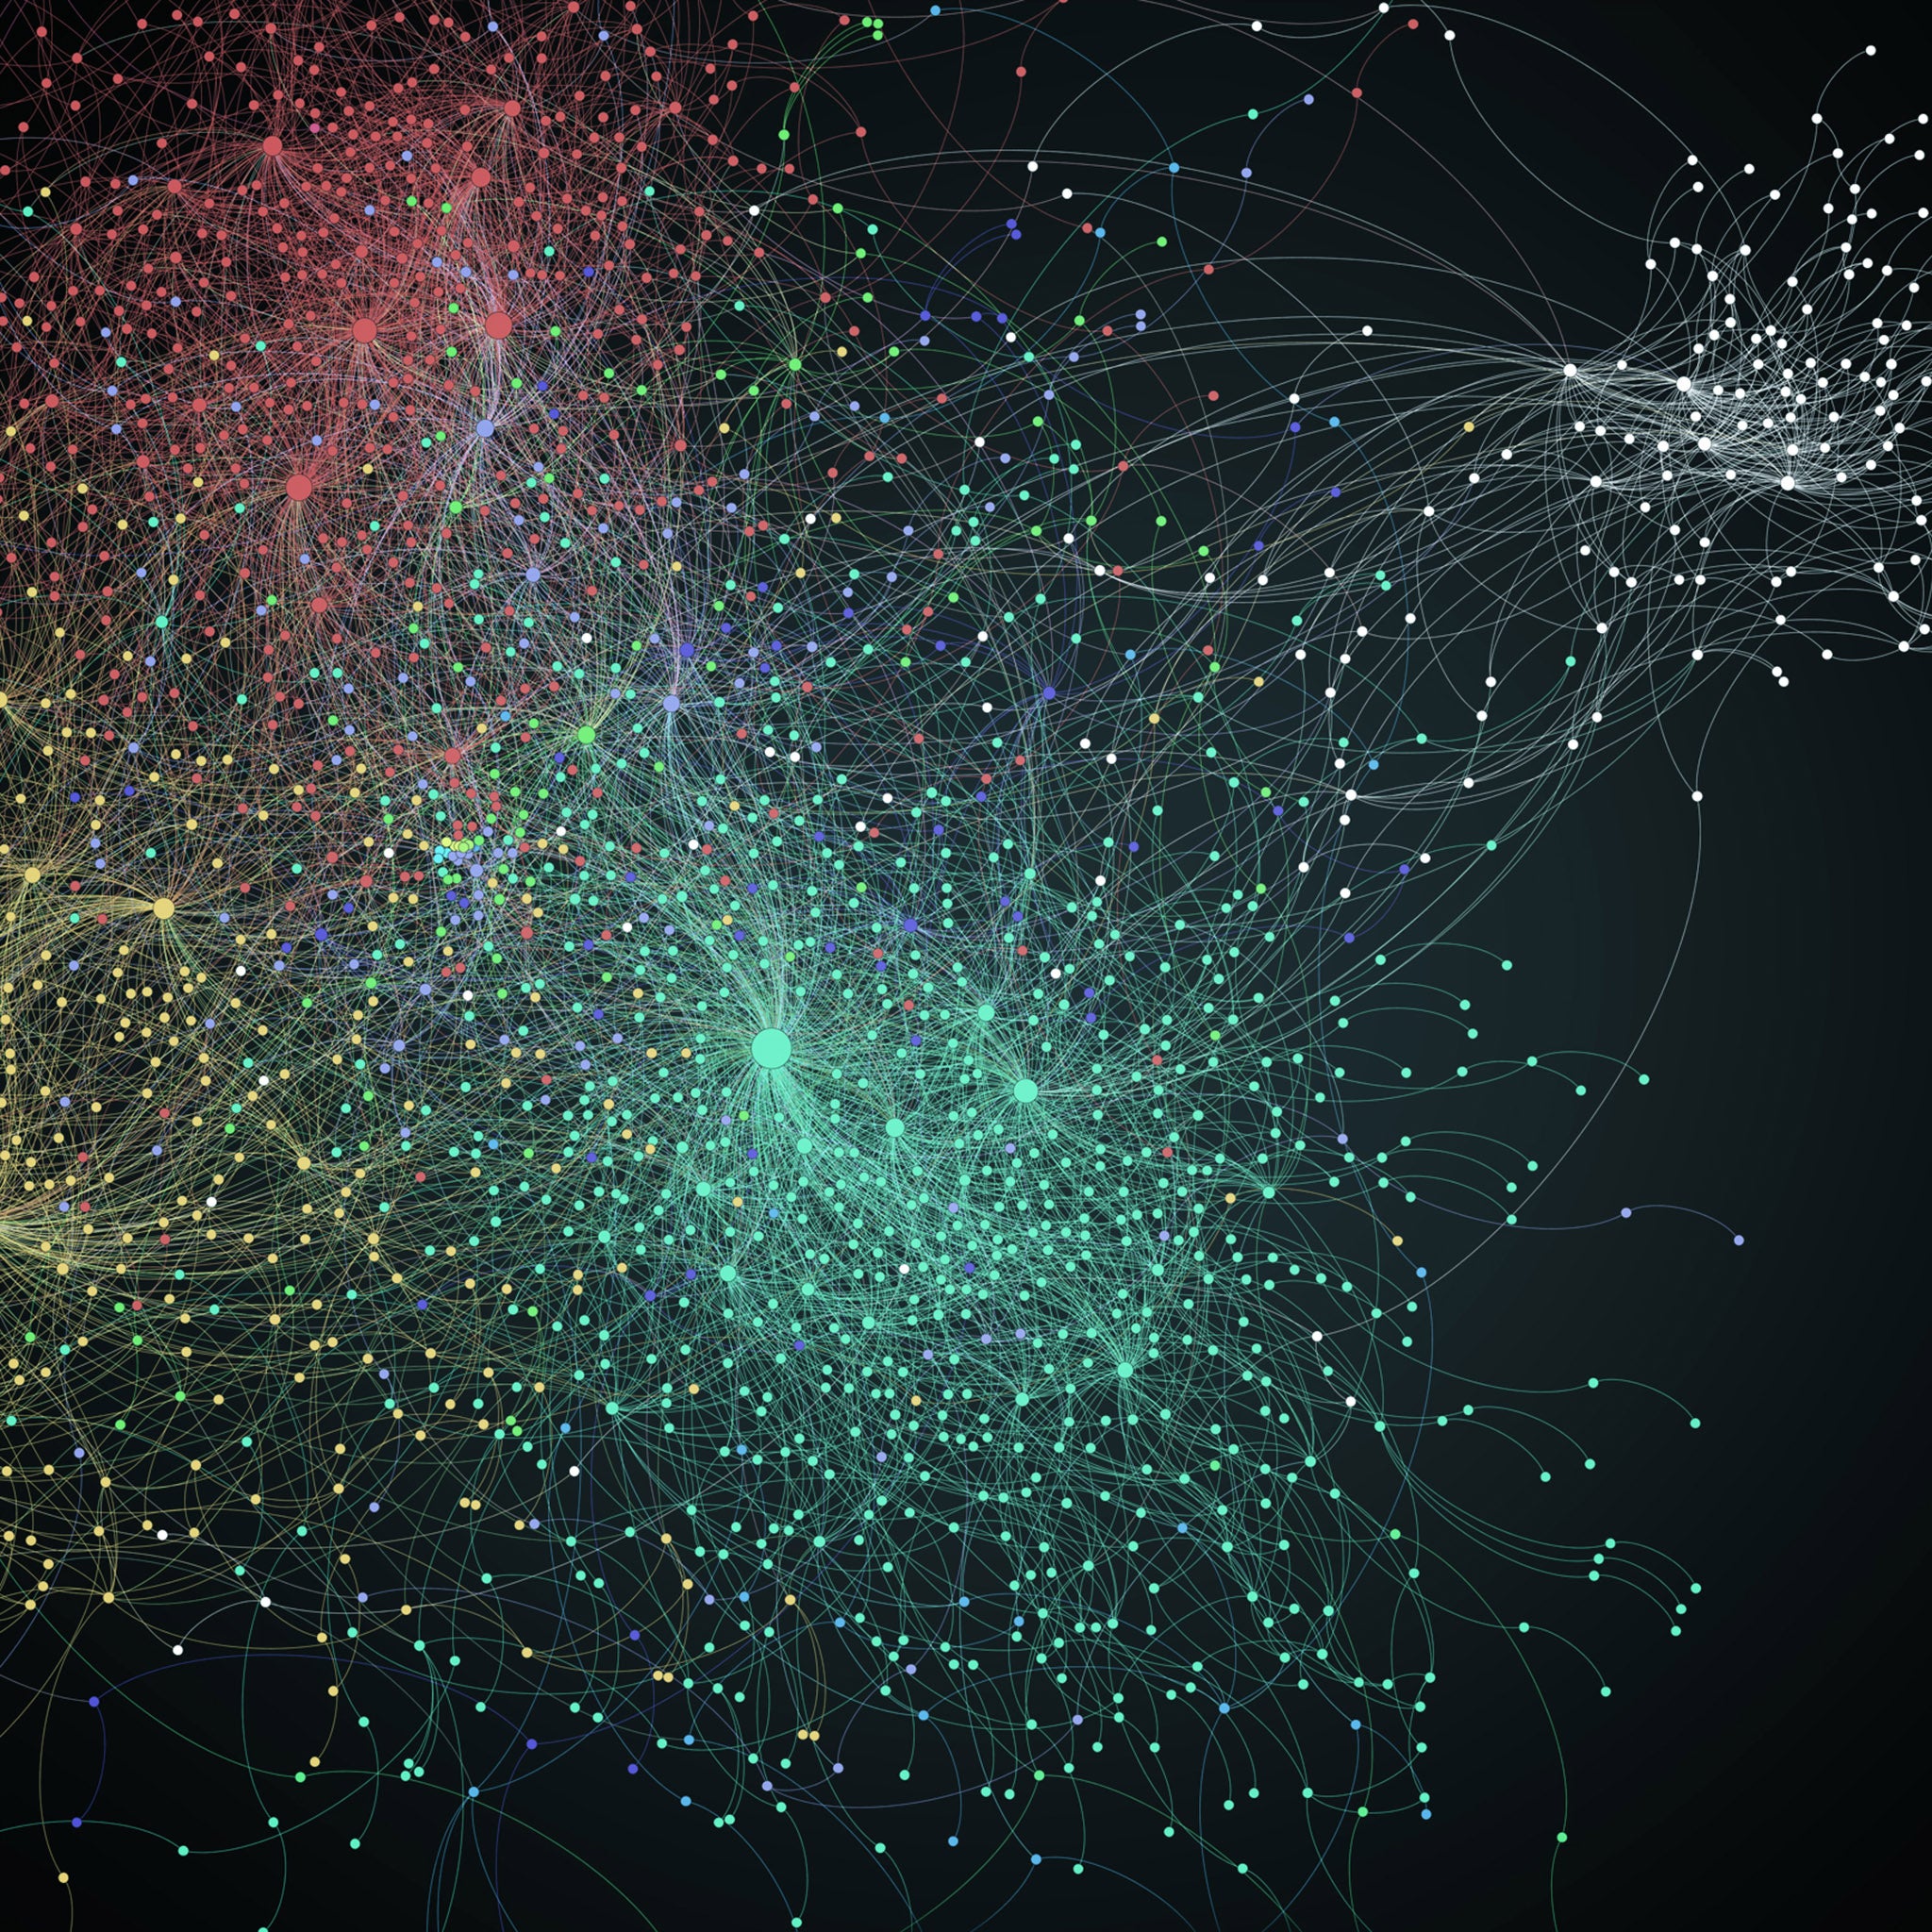 State of the art: a visualisation of data collected about ‘taste groups’ and their connections by Curalytics